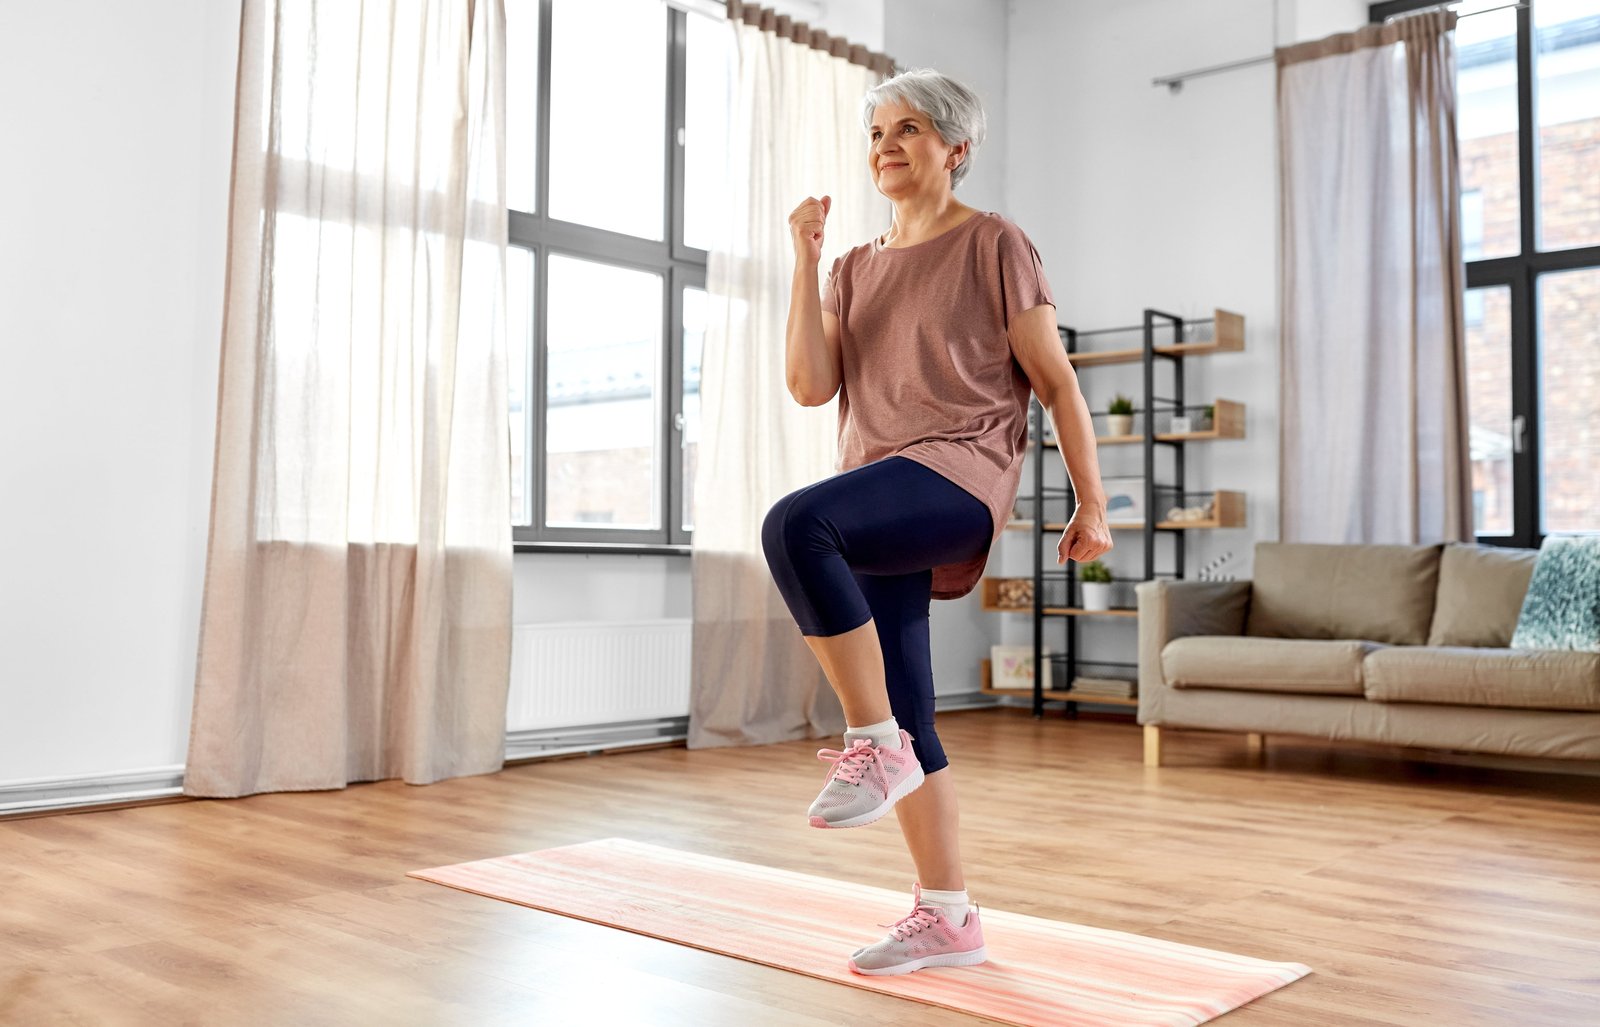 sport, fitness and healthy lifestyle concept - smiling senior woman exercising on mat and walking on spot at home
WEBSTORY HABITO EXERCÍCIOS